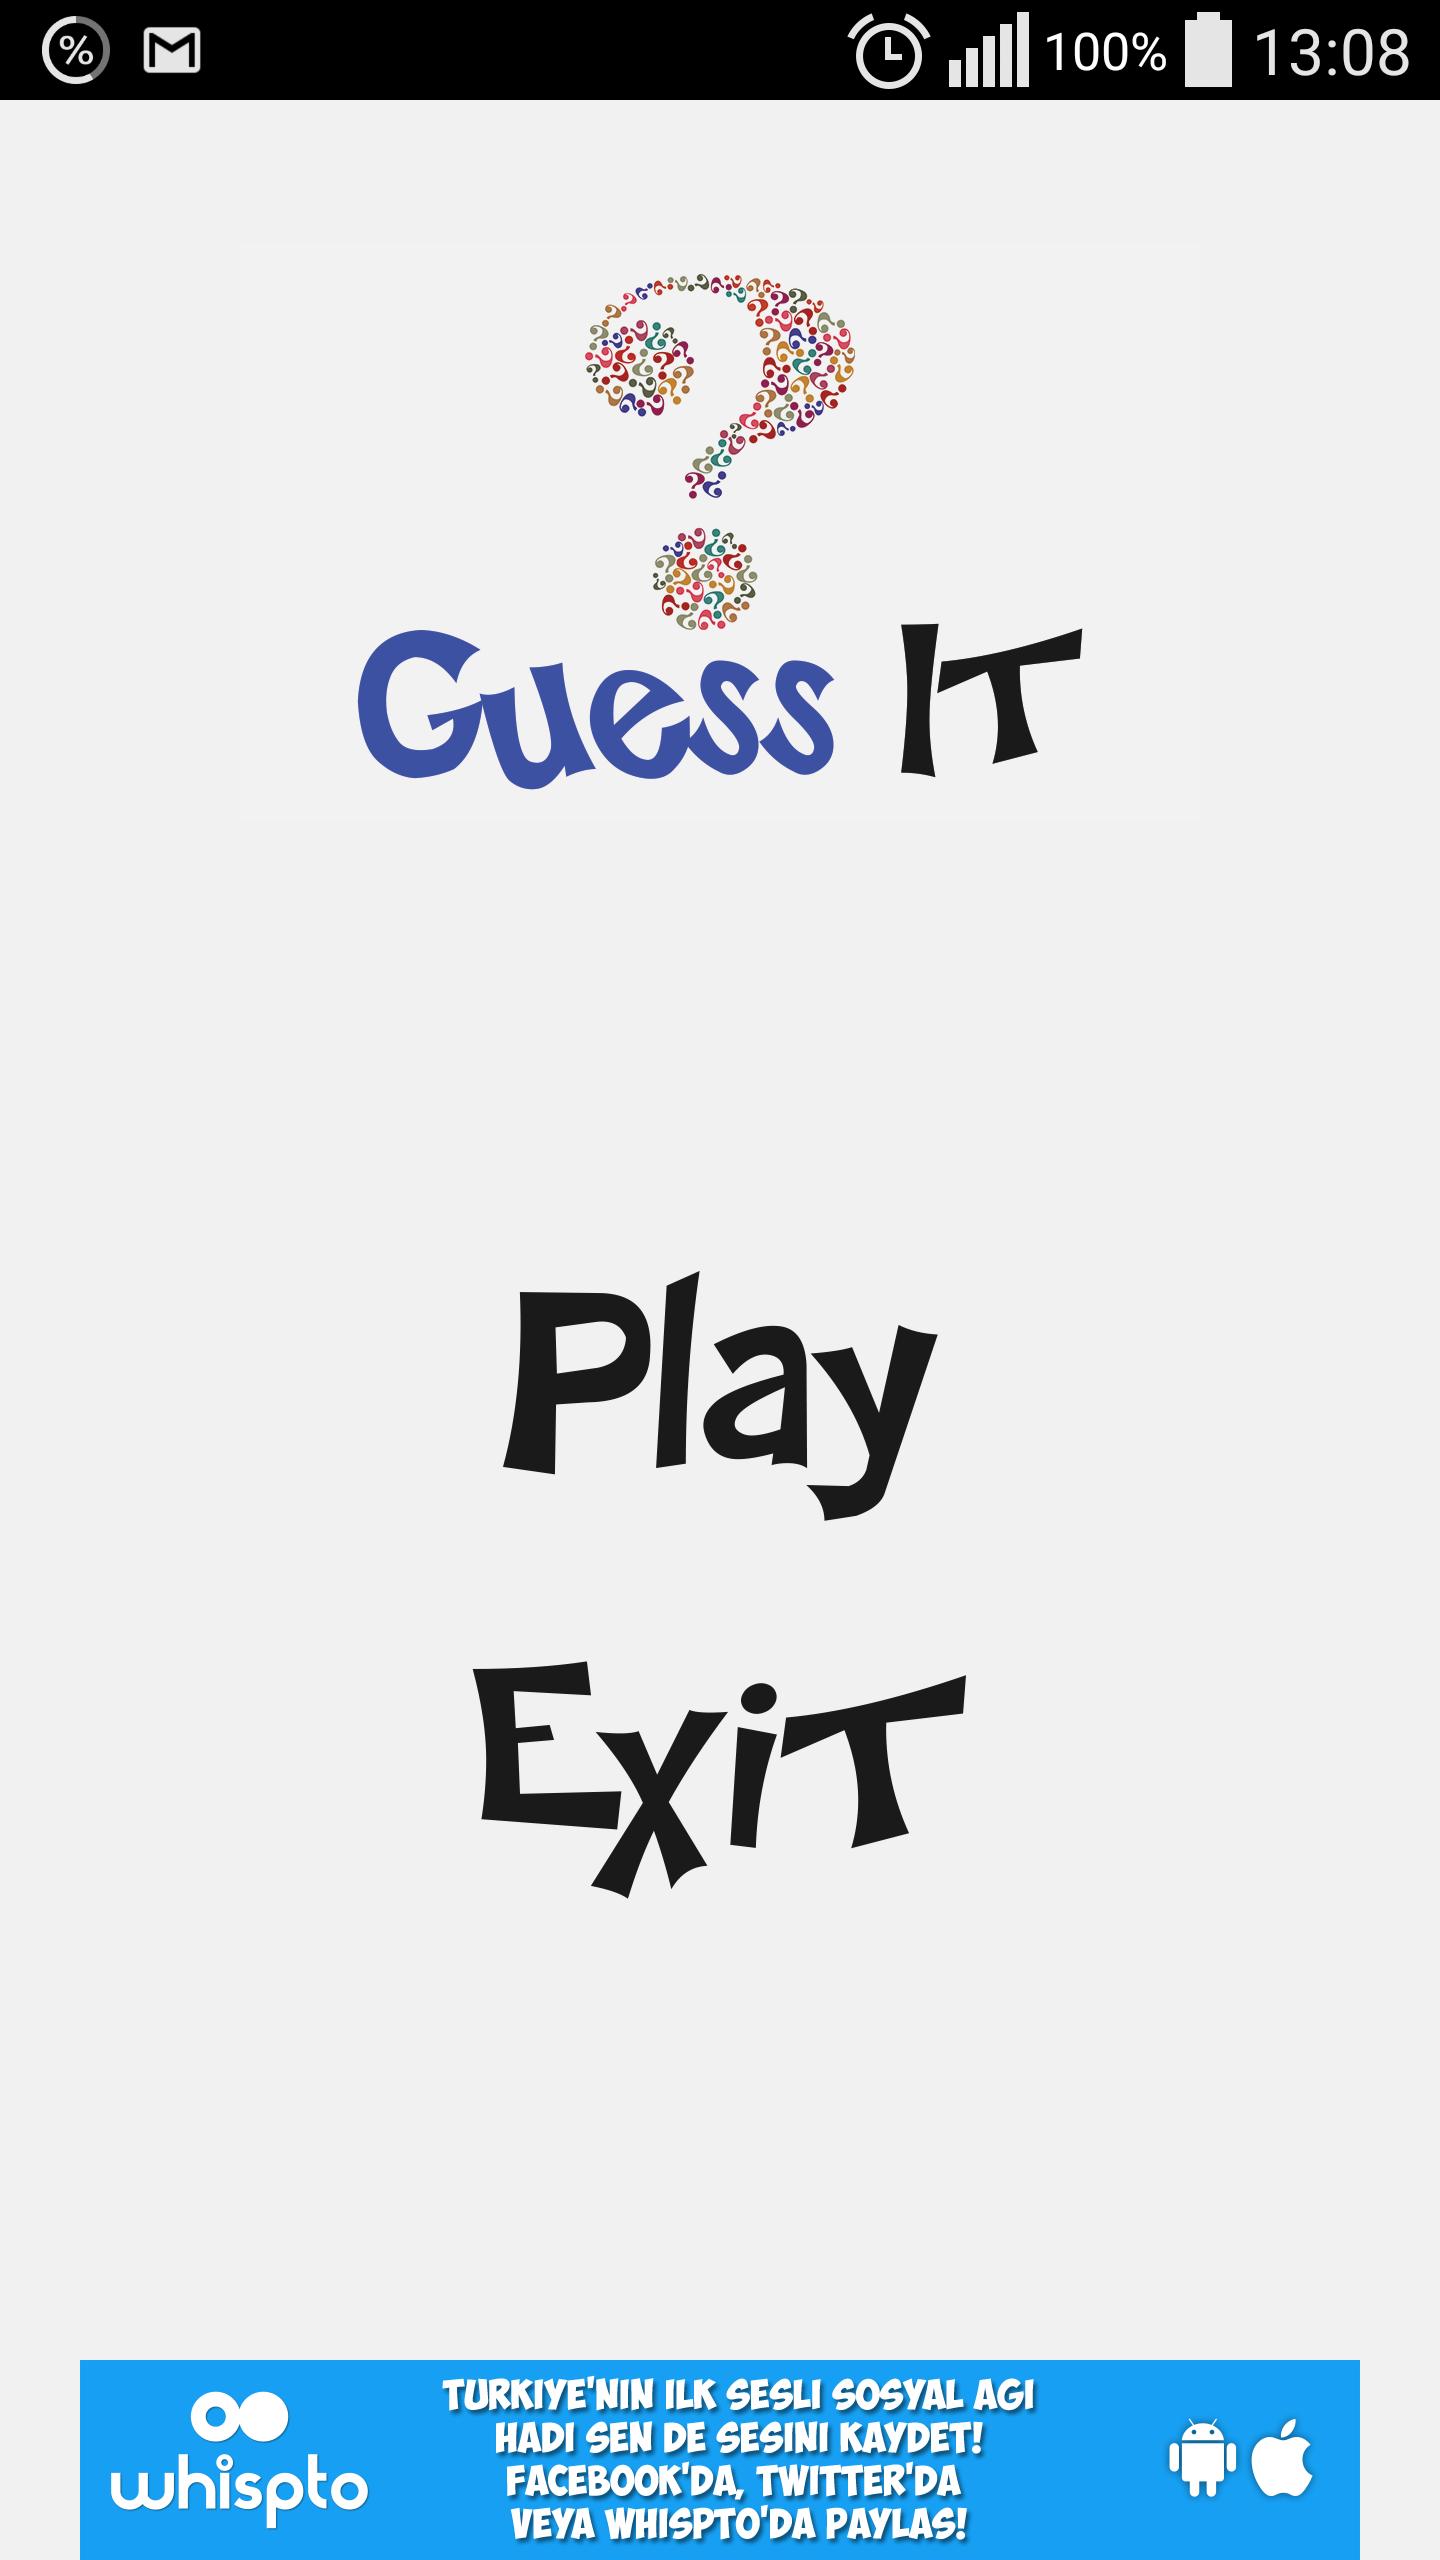 Guess It for Android - APK Download